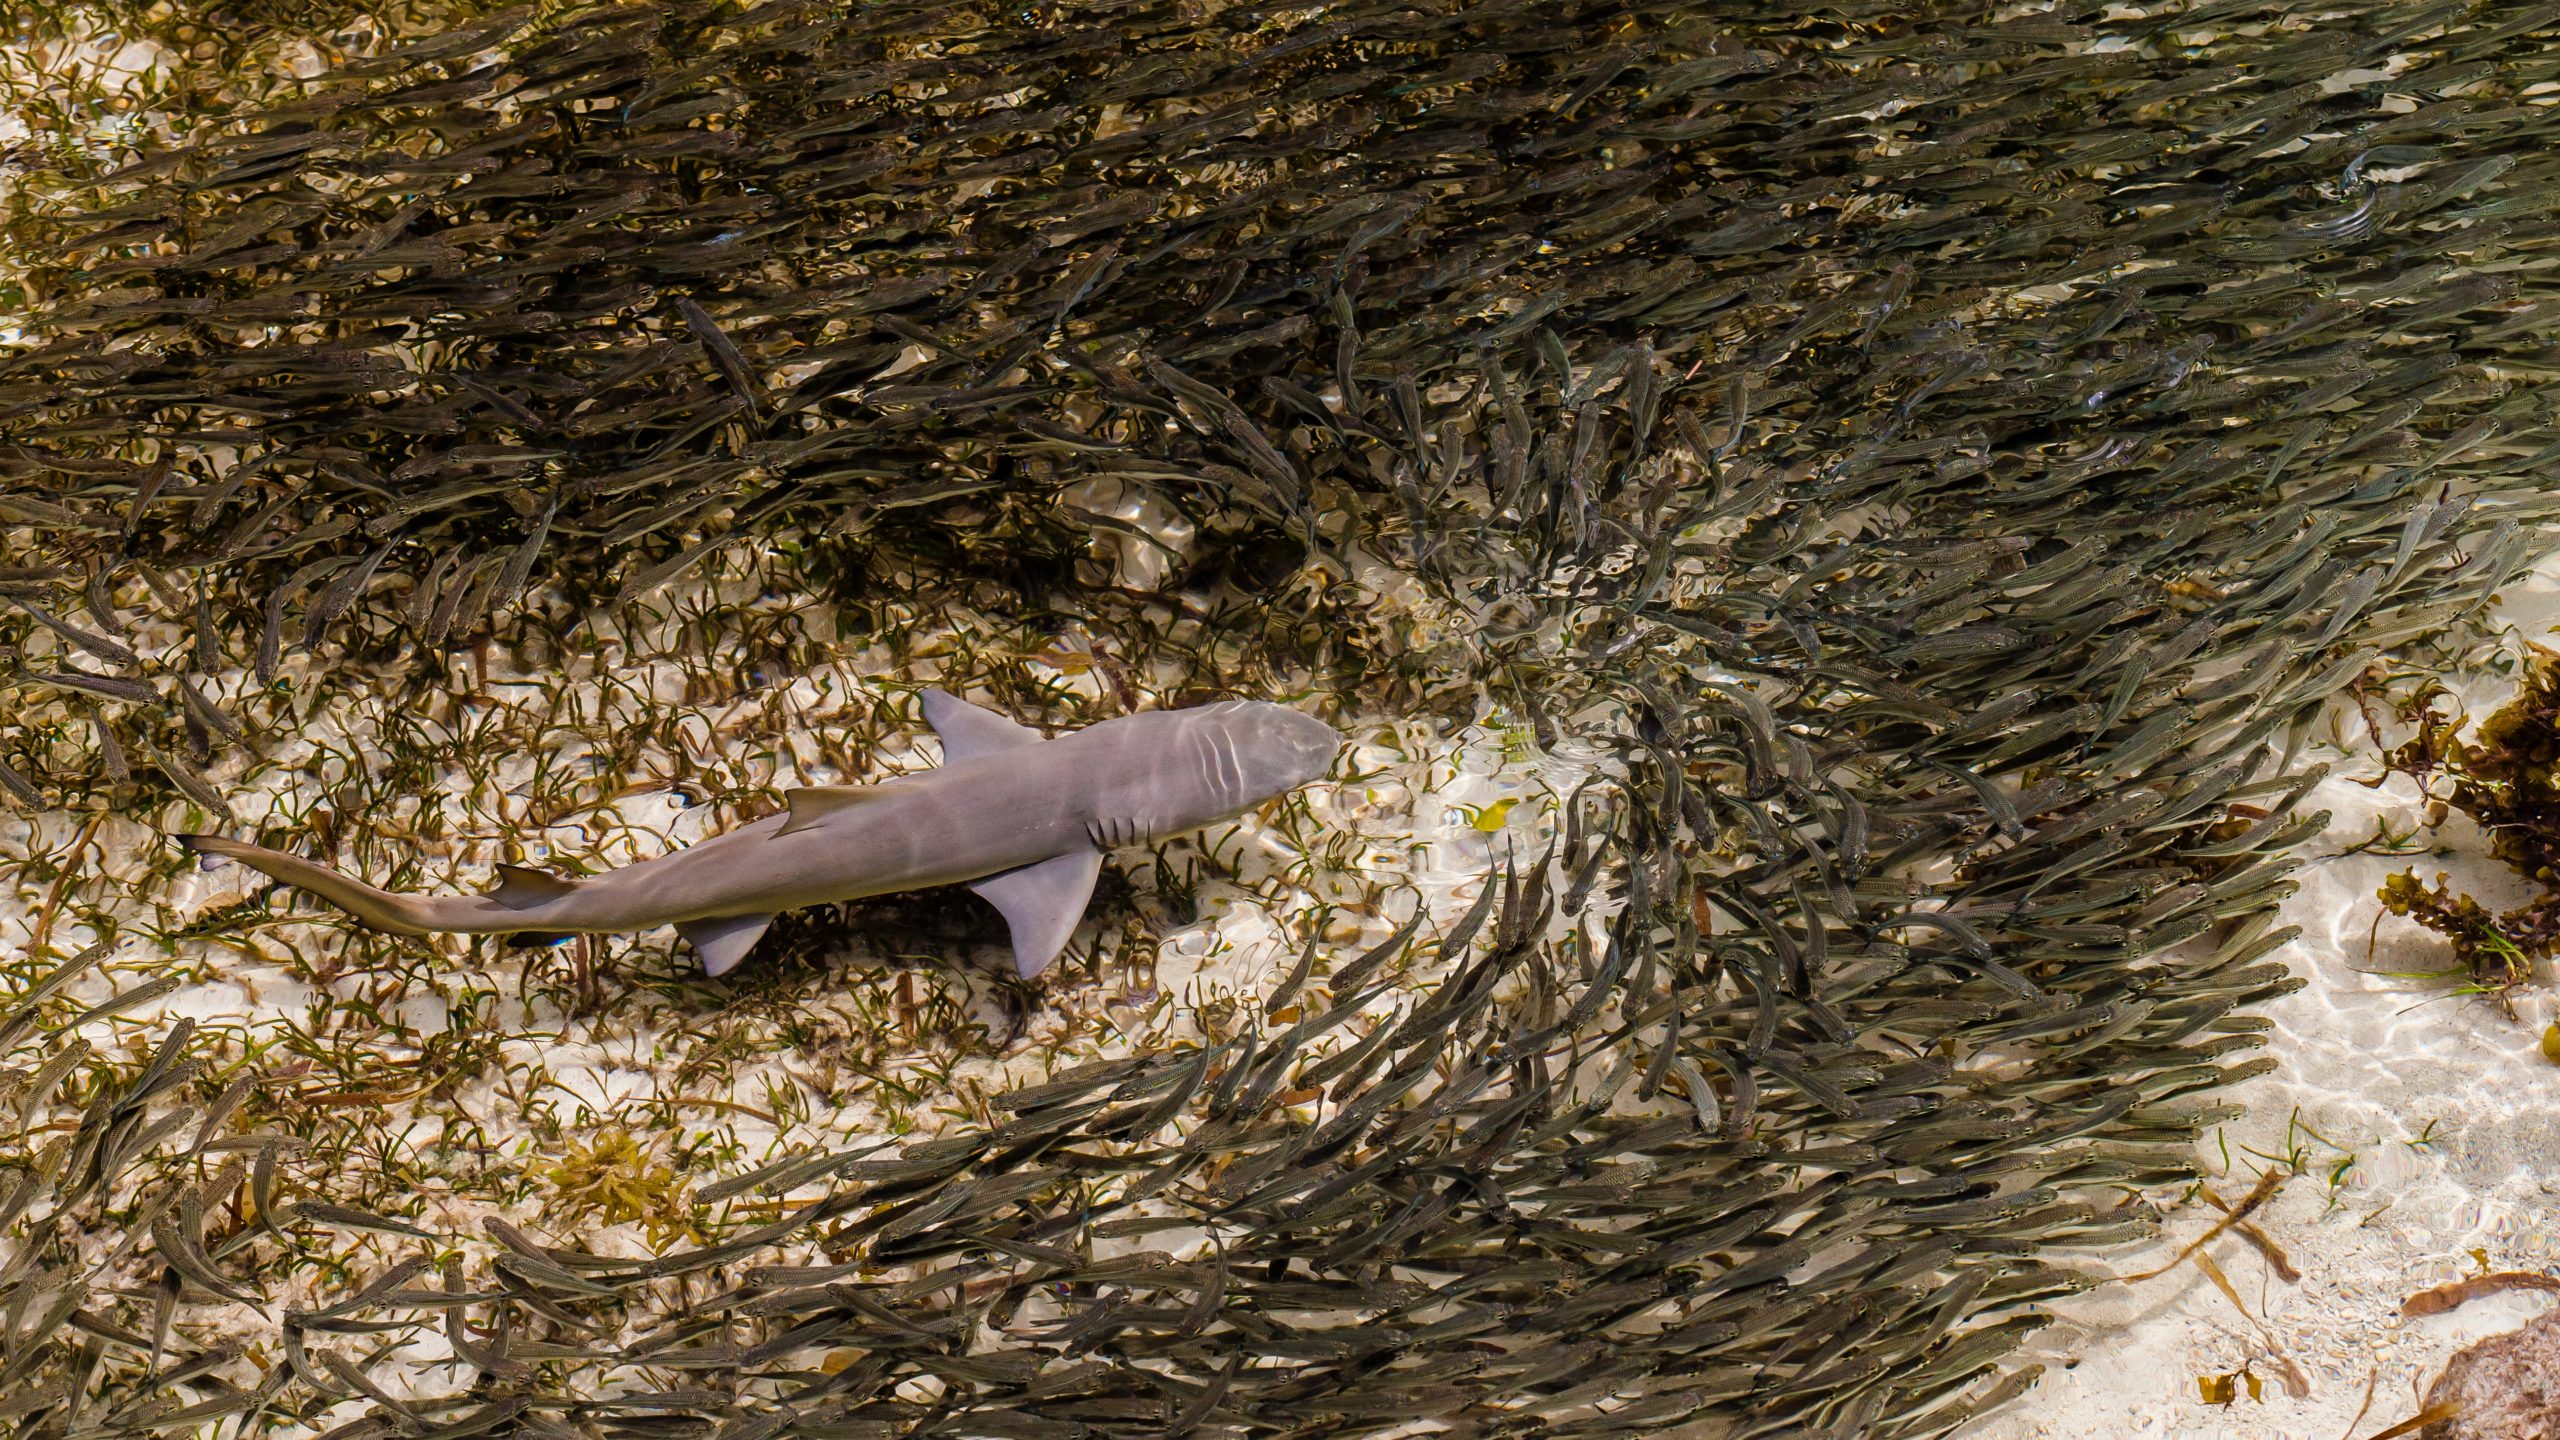 A small shark swims in the waters around the Seychelles